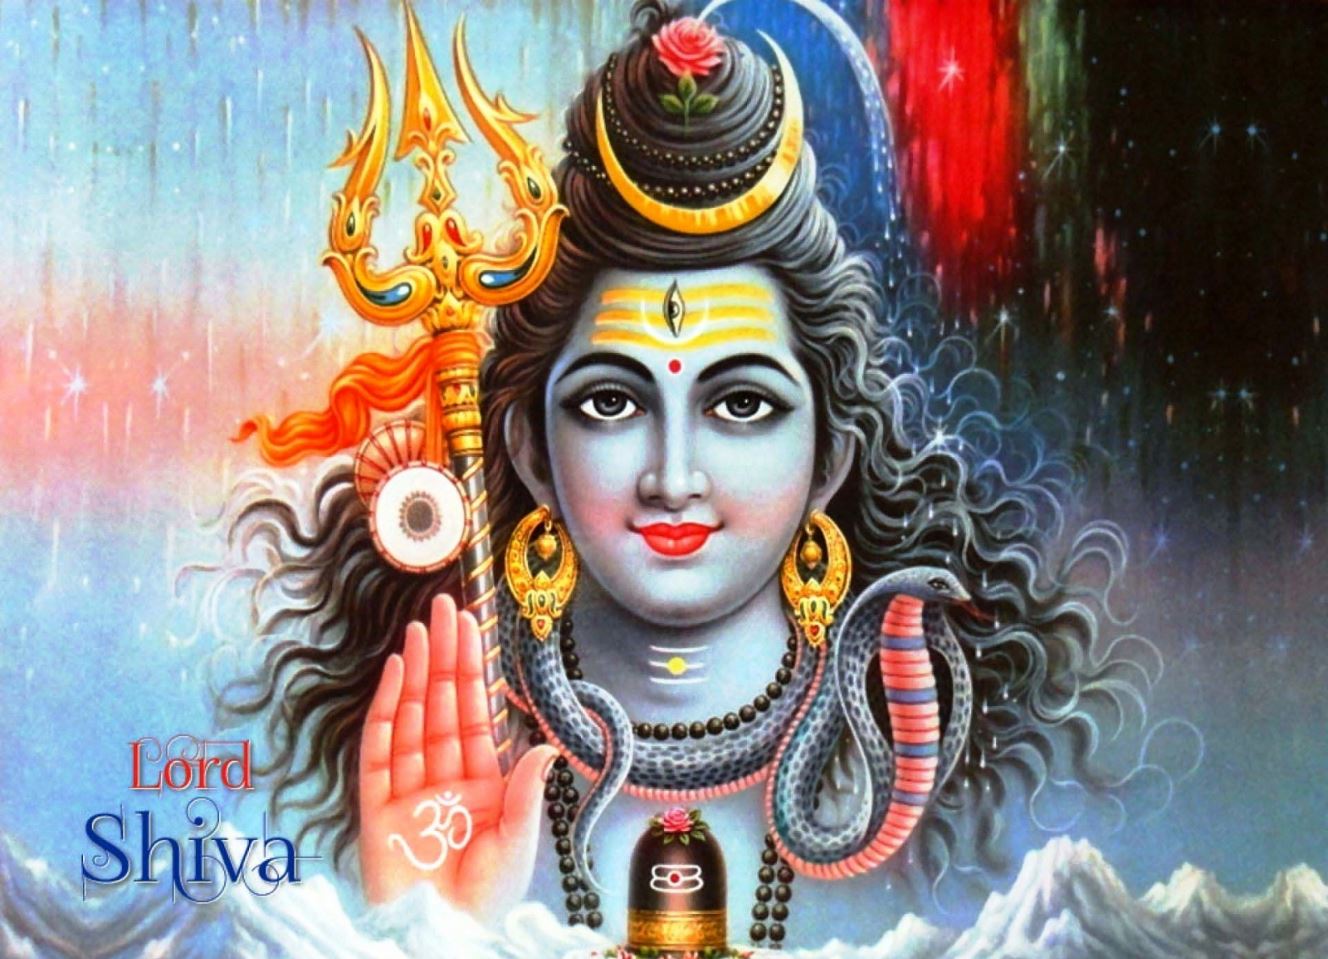 10 Qualities of Lord Shiva that made him different from everyone else